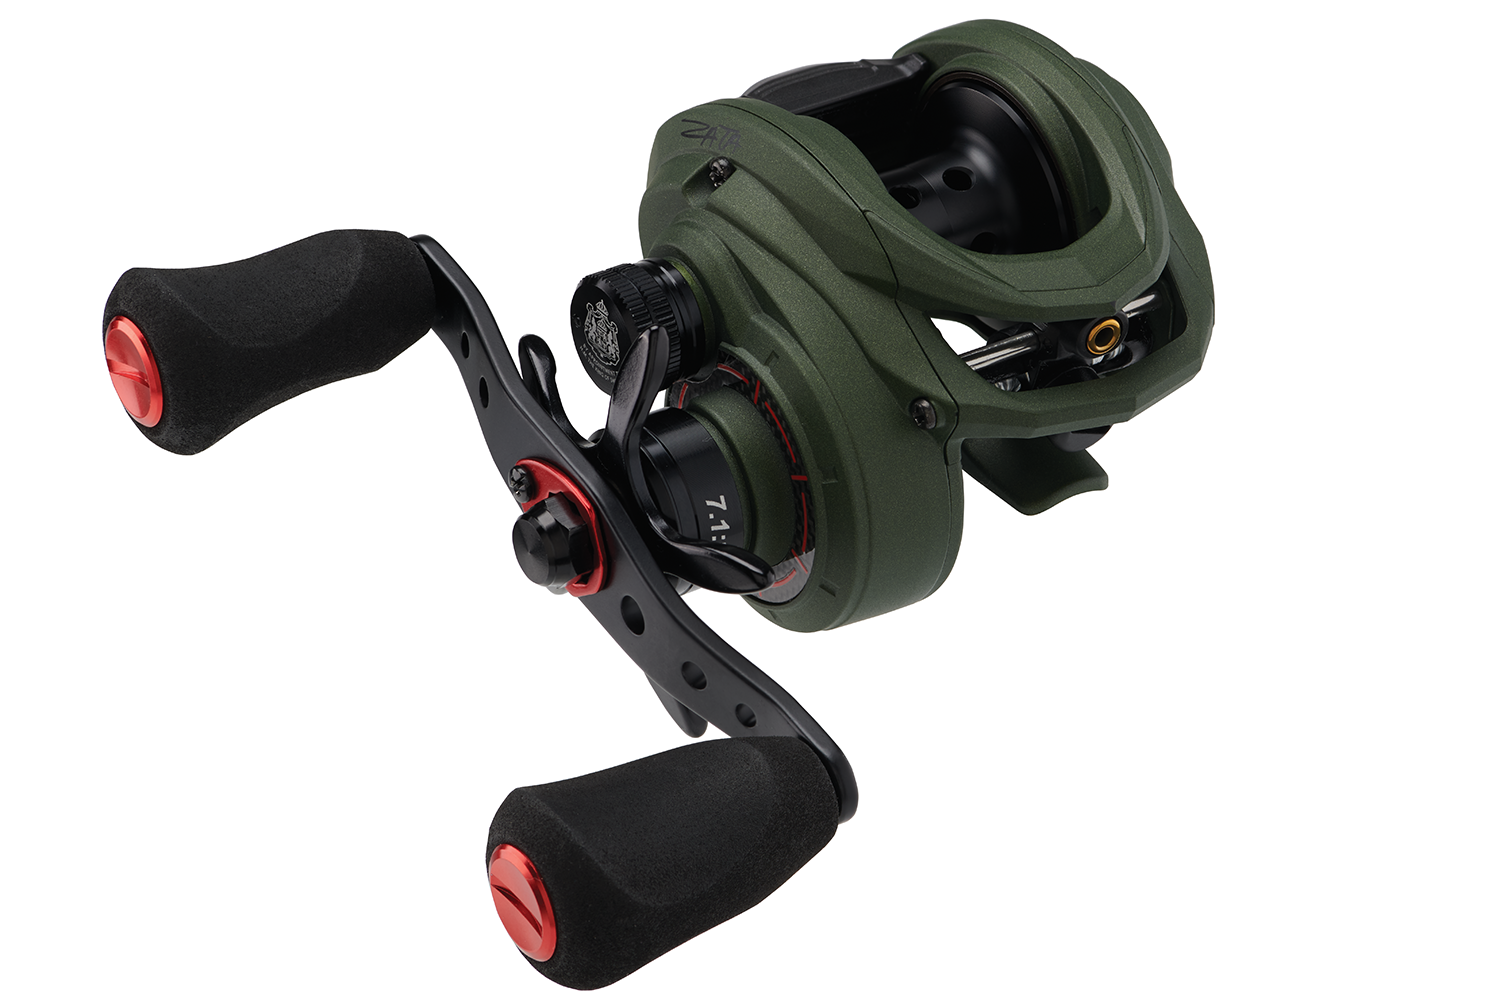 <p><b>Abu Garcia Zata Low Profile Reel</b></p>
<p>The Abu Garcia Zata low profile reel is ready to handle whatever comes its way and exemplifies a sleek reel design in a compact package. Packed with features like 11 ball bearings and a Duragear brass gear the Zata provides smooth casting and retrieval. The Inifini brake system allows almost limitless adjustability to handle any fishing situation. Zata is also available in a baitcasting combo, spinning reel and spinning combo.  </p>
<p><a href=